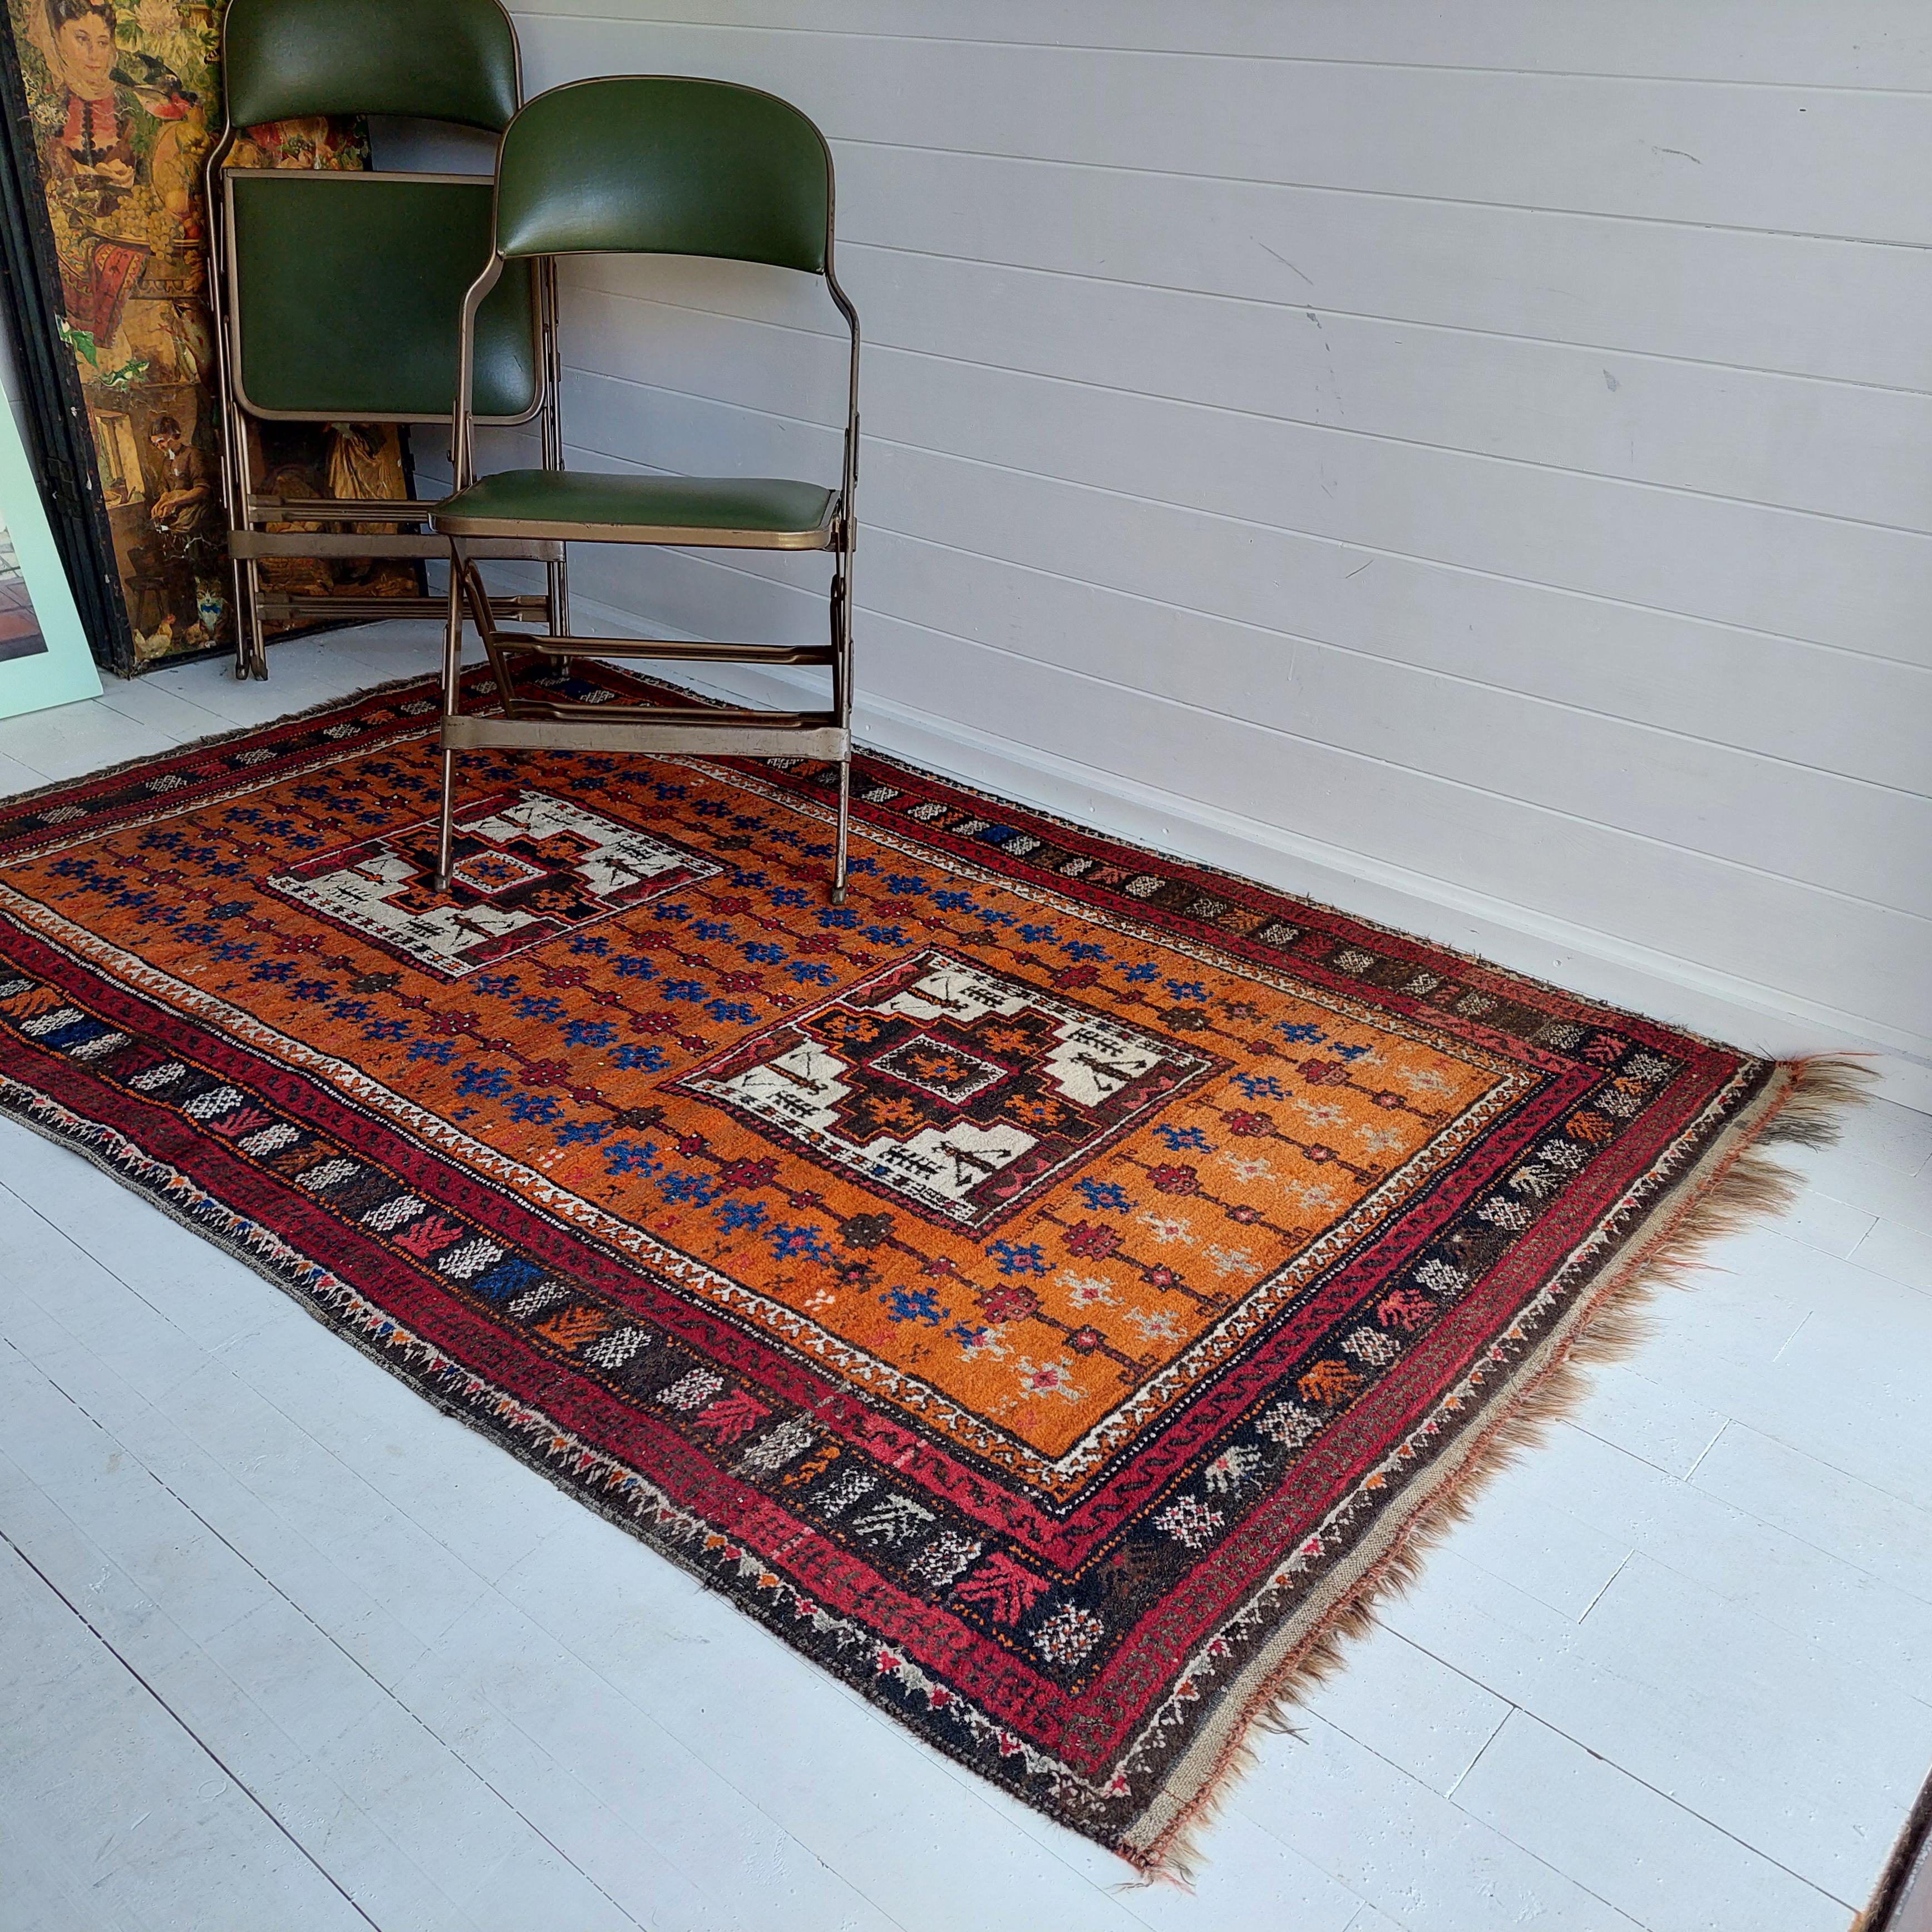 A good example of Caucasian Karachov Kazak handwoven rug
With the traditional medaillon design, on a scare orange ground.
The colour combinations make this a visually striking rug.
Note the many tribal filler items in the field. The main border is